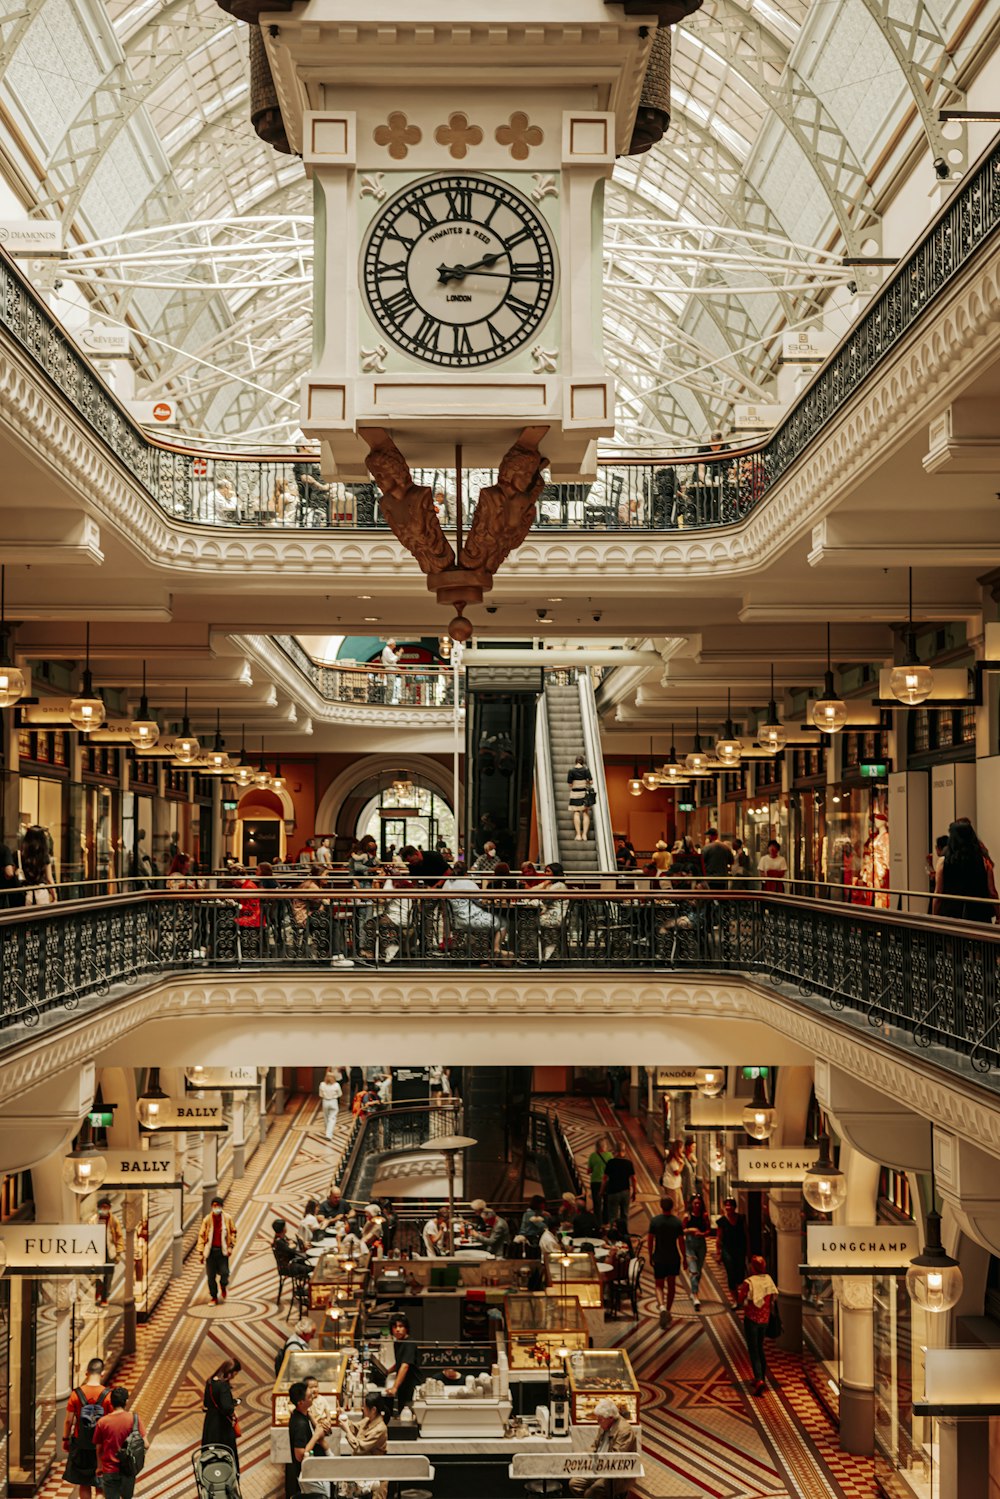 a large clock hangs from the ceiling